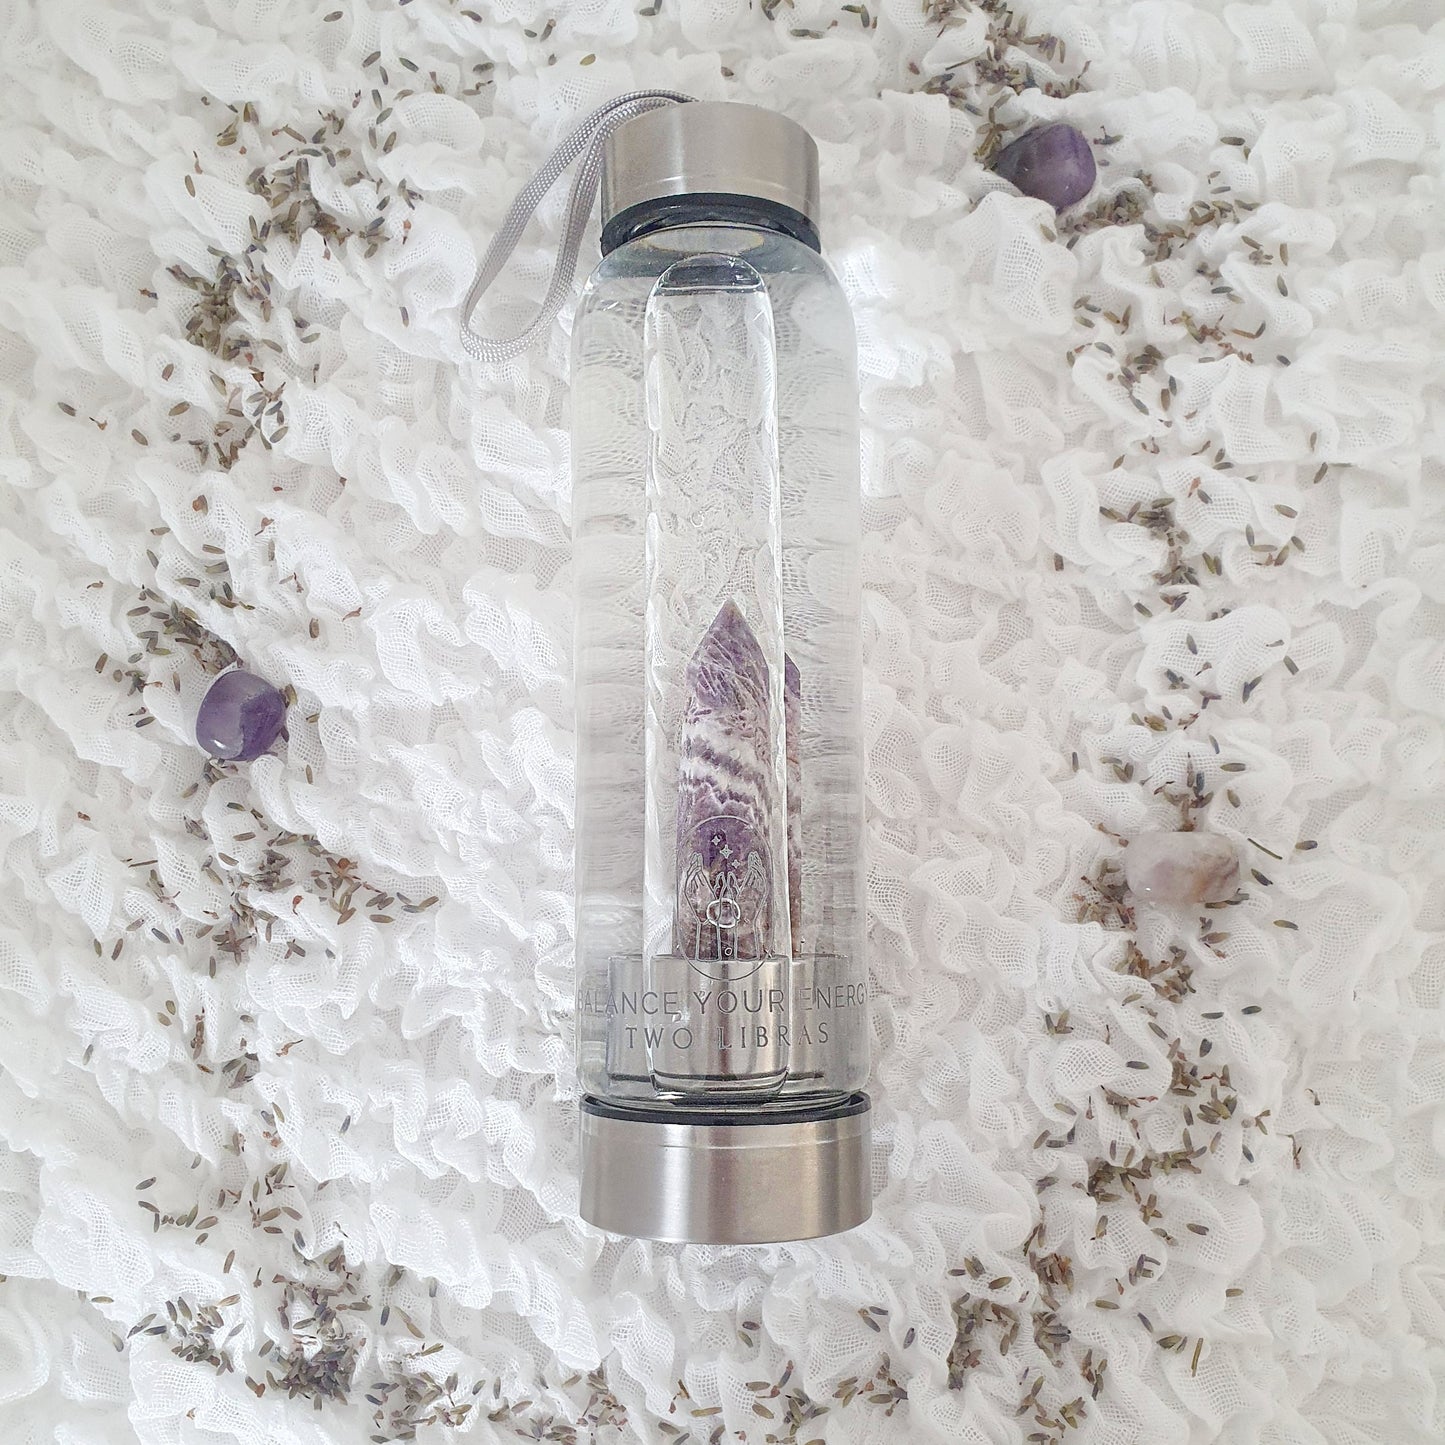 Amethyst Glass Water Bottle - To soothe your soul with clarity and calm.